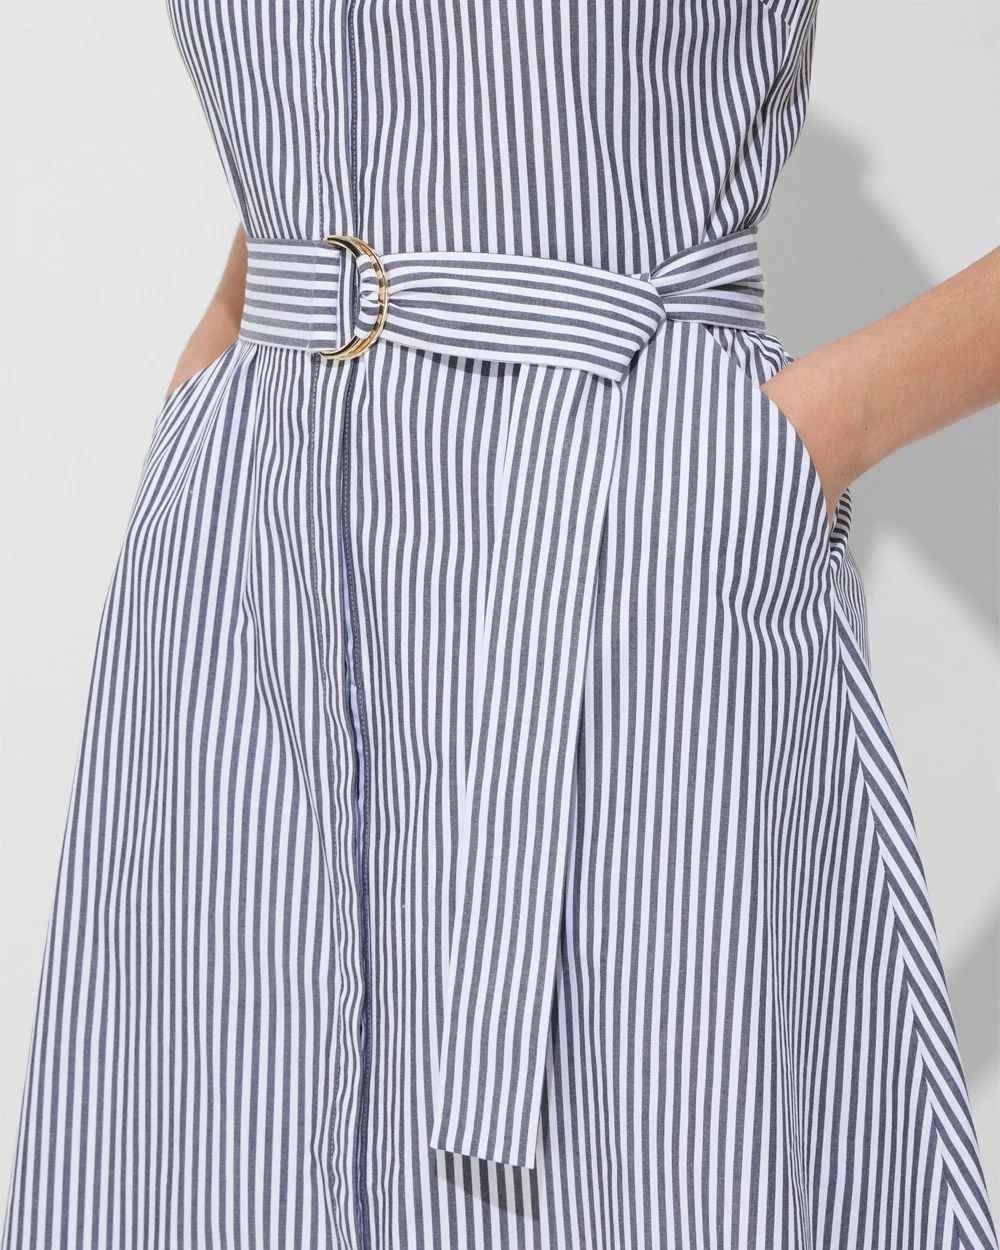 Outlet WHBM Striped Dress click to view larger image.